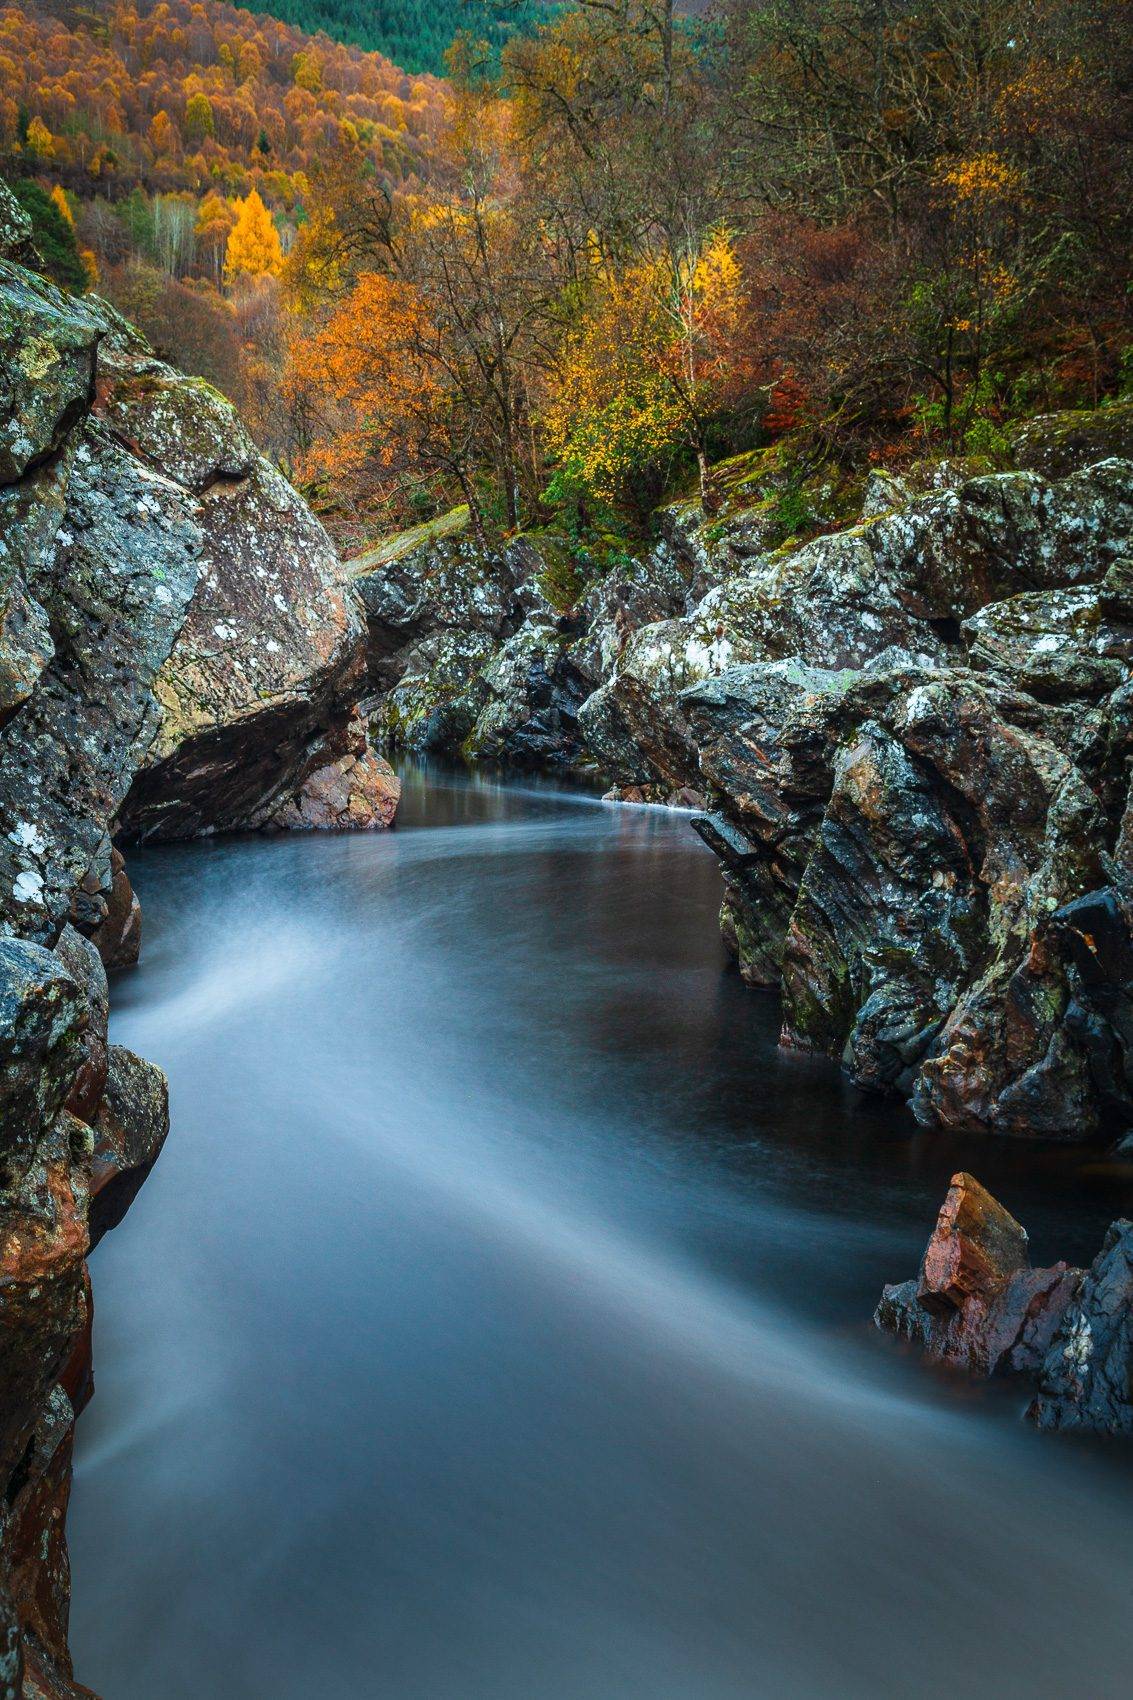 The Soldier's Leap at Killicrankie on the River Garry, Perthshire, Scotland.